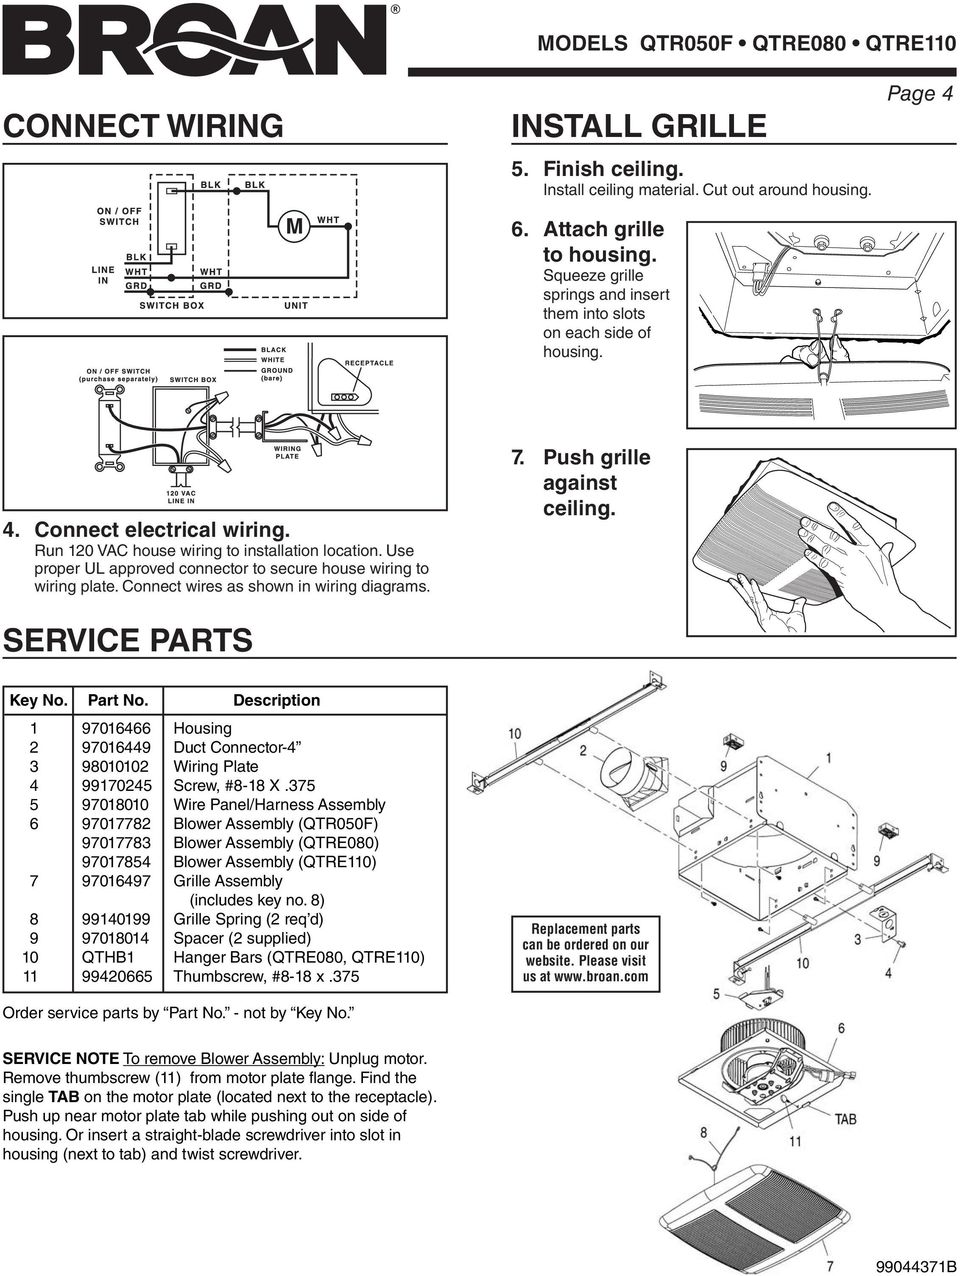 Use proper UL approved connector to secure house wiring to wiring plate. Connect wires as shown in wiring diagrams. SERVICE PARTS 7. Push grille against ceiling. Key No. Part No.